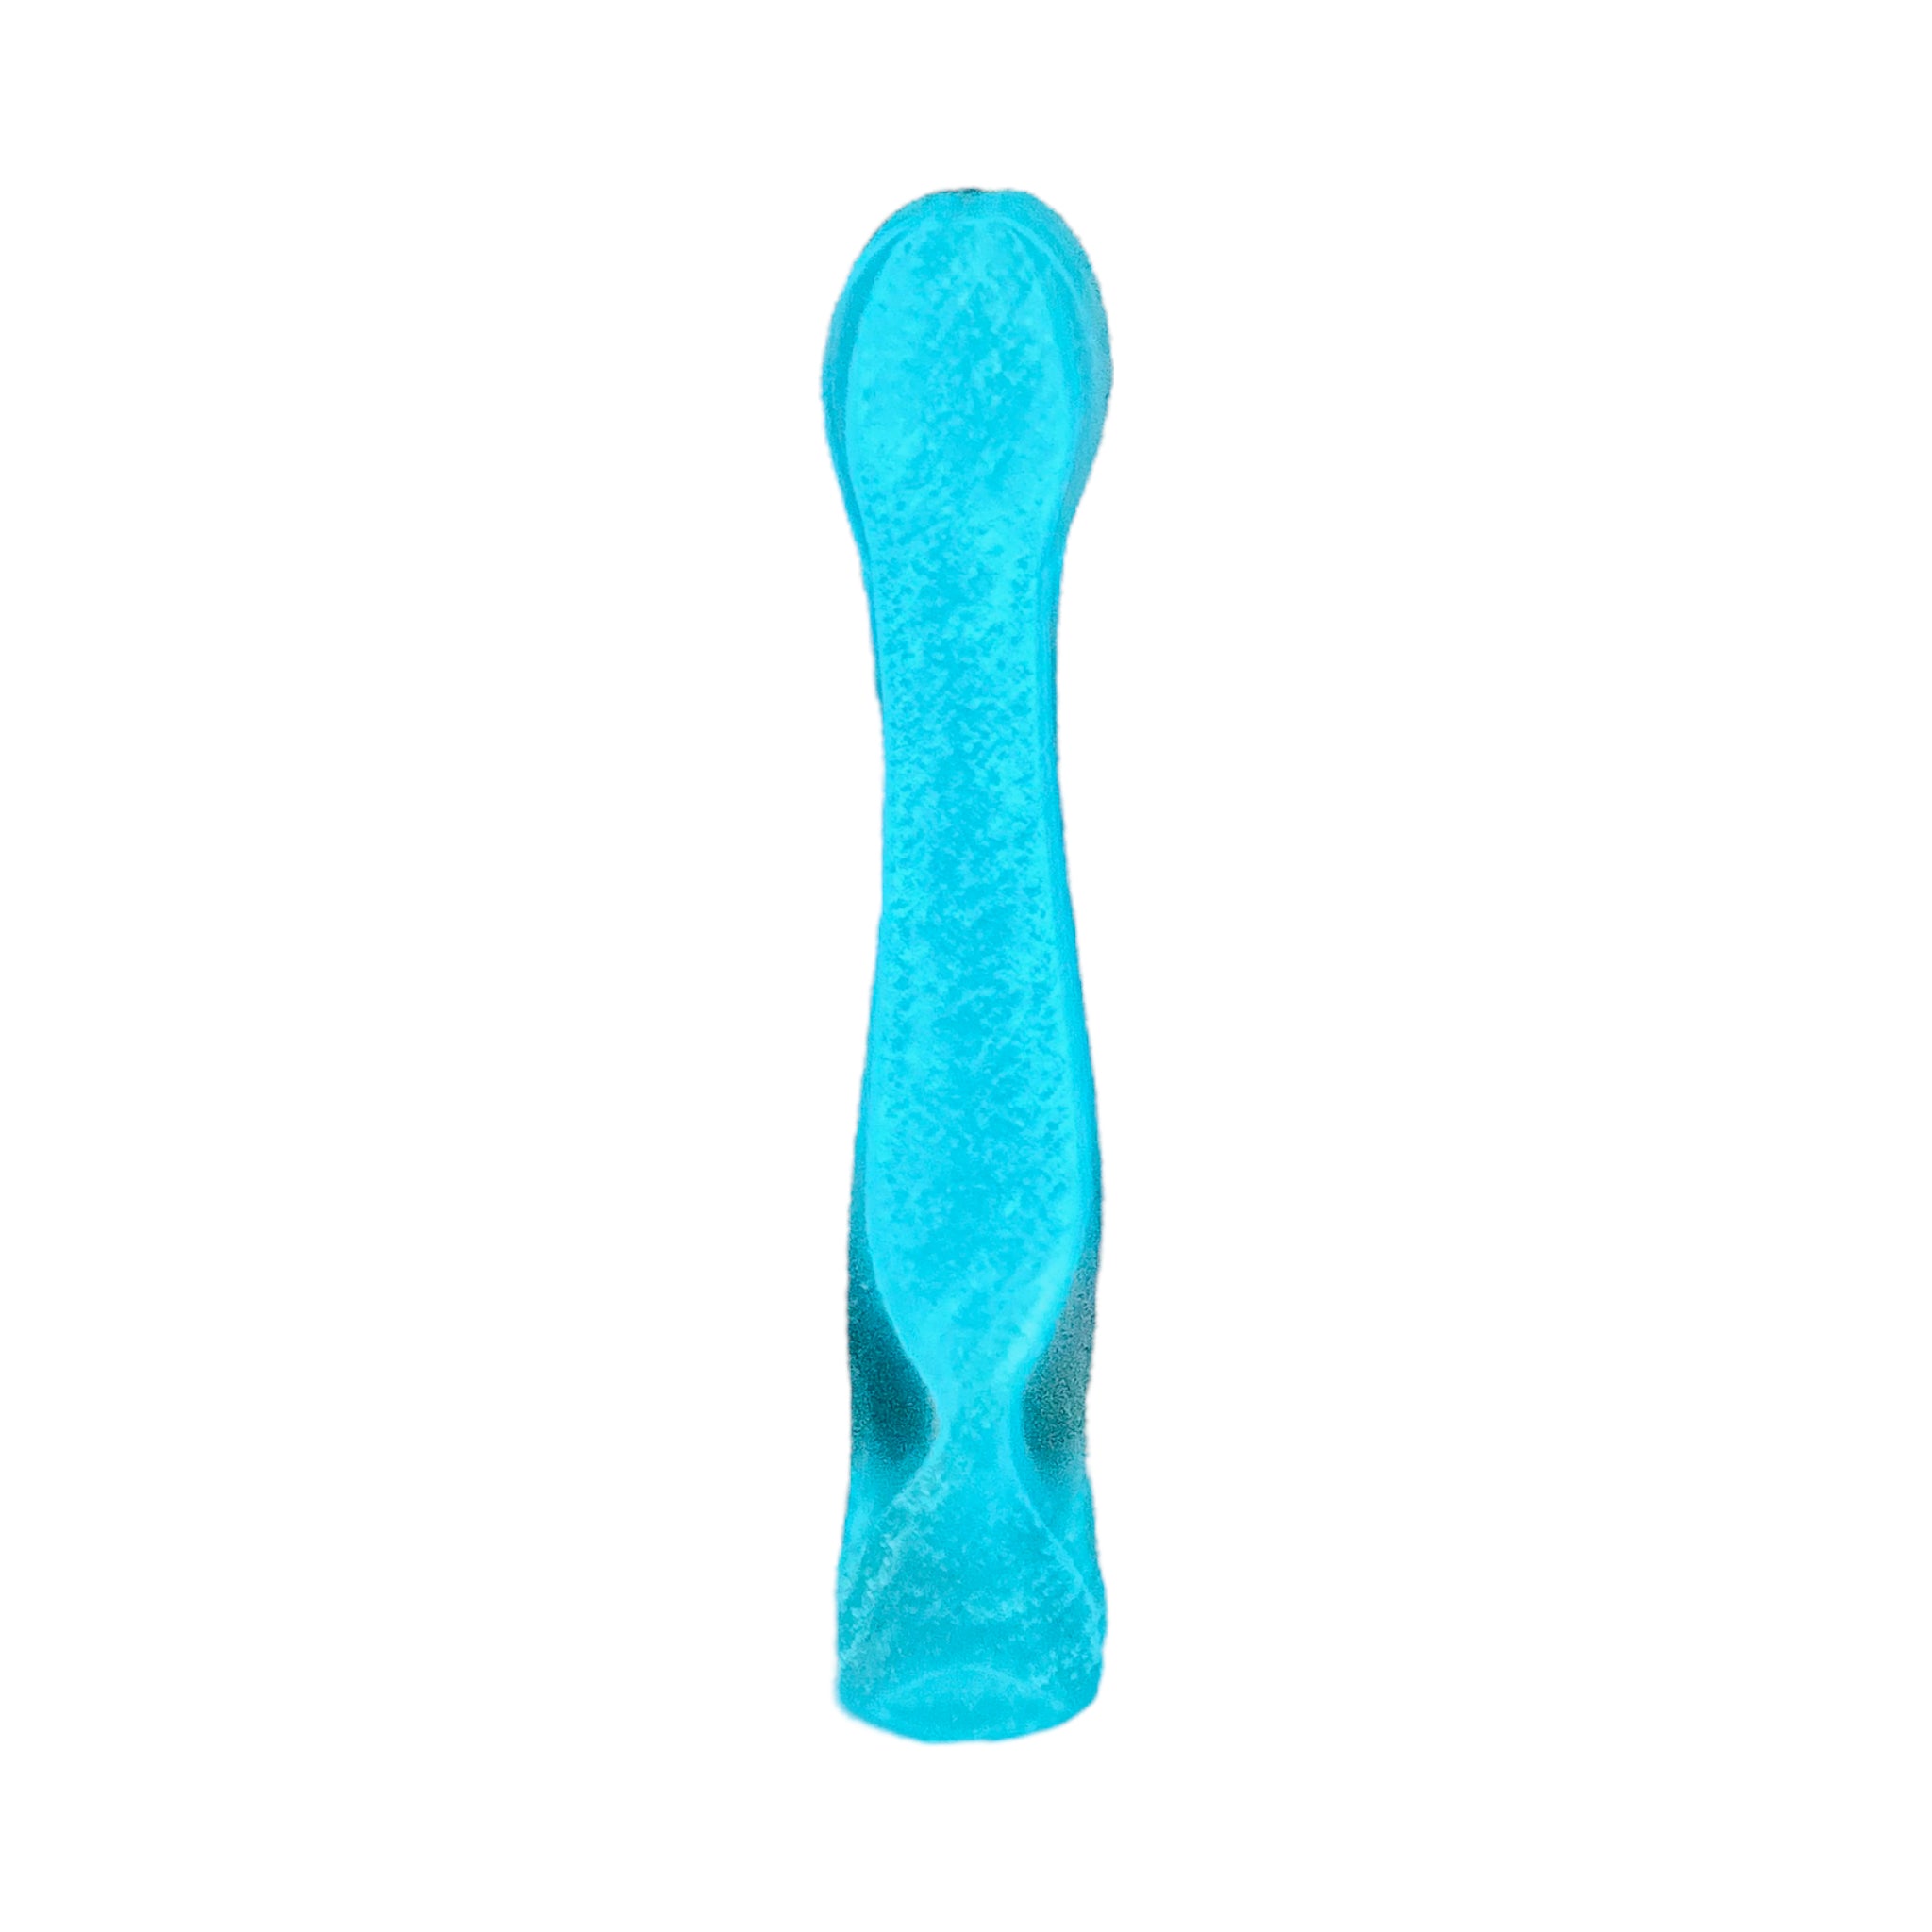 Glass Chillum Pipe - Glow In The Dark Inside Out Hand Pipe